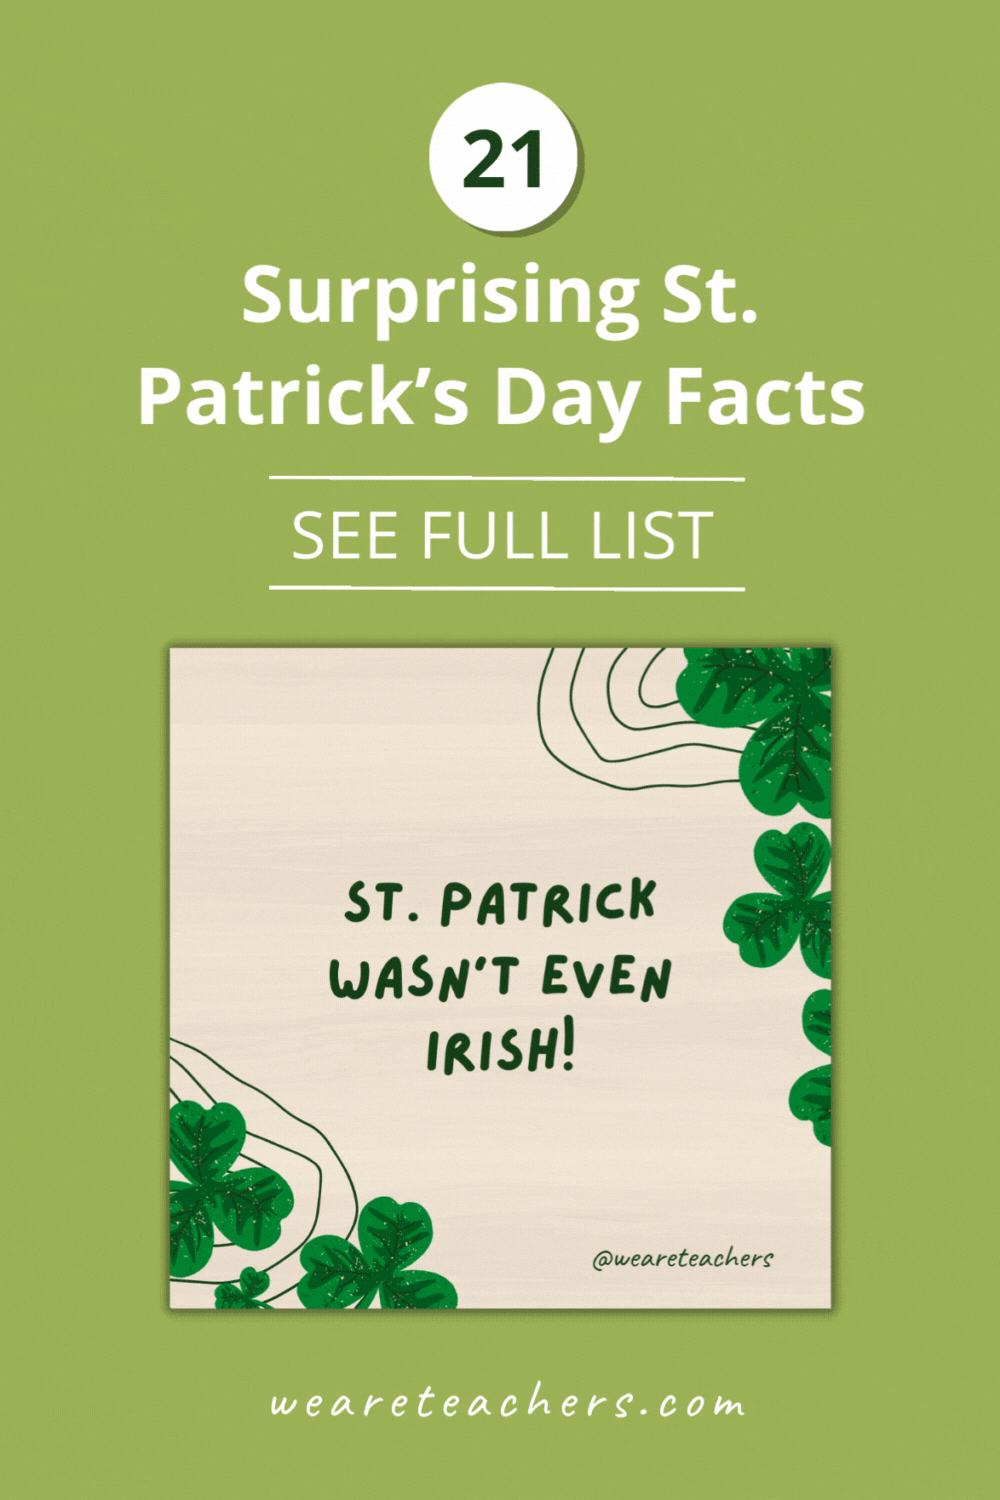 Getting ready to go green? Here are some St. Patrick’s Day facts to share in the classroom to teach kids about the Irish holiday.